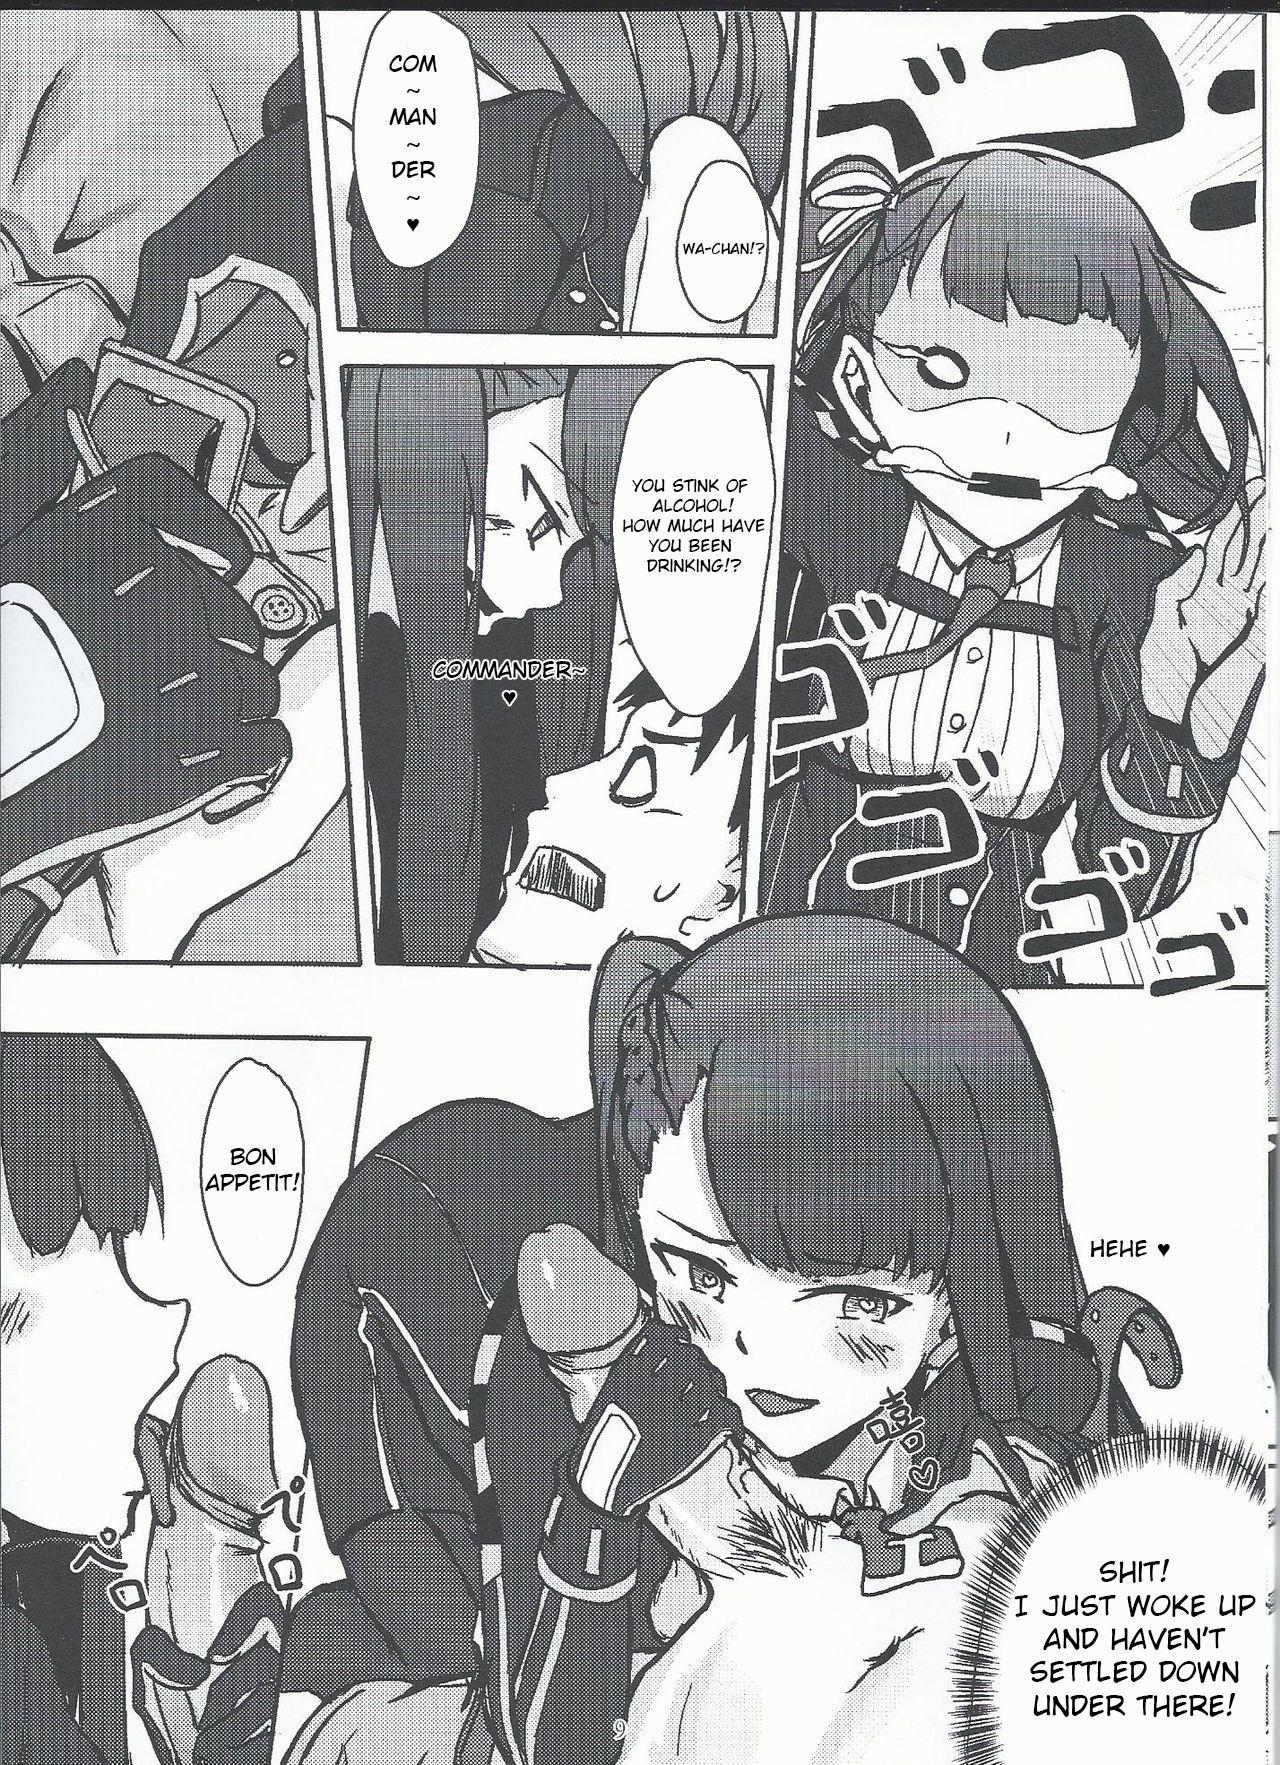 I don't know what to title this book, but anyway it's about WA2000 7